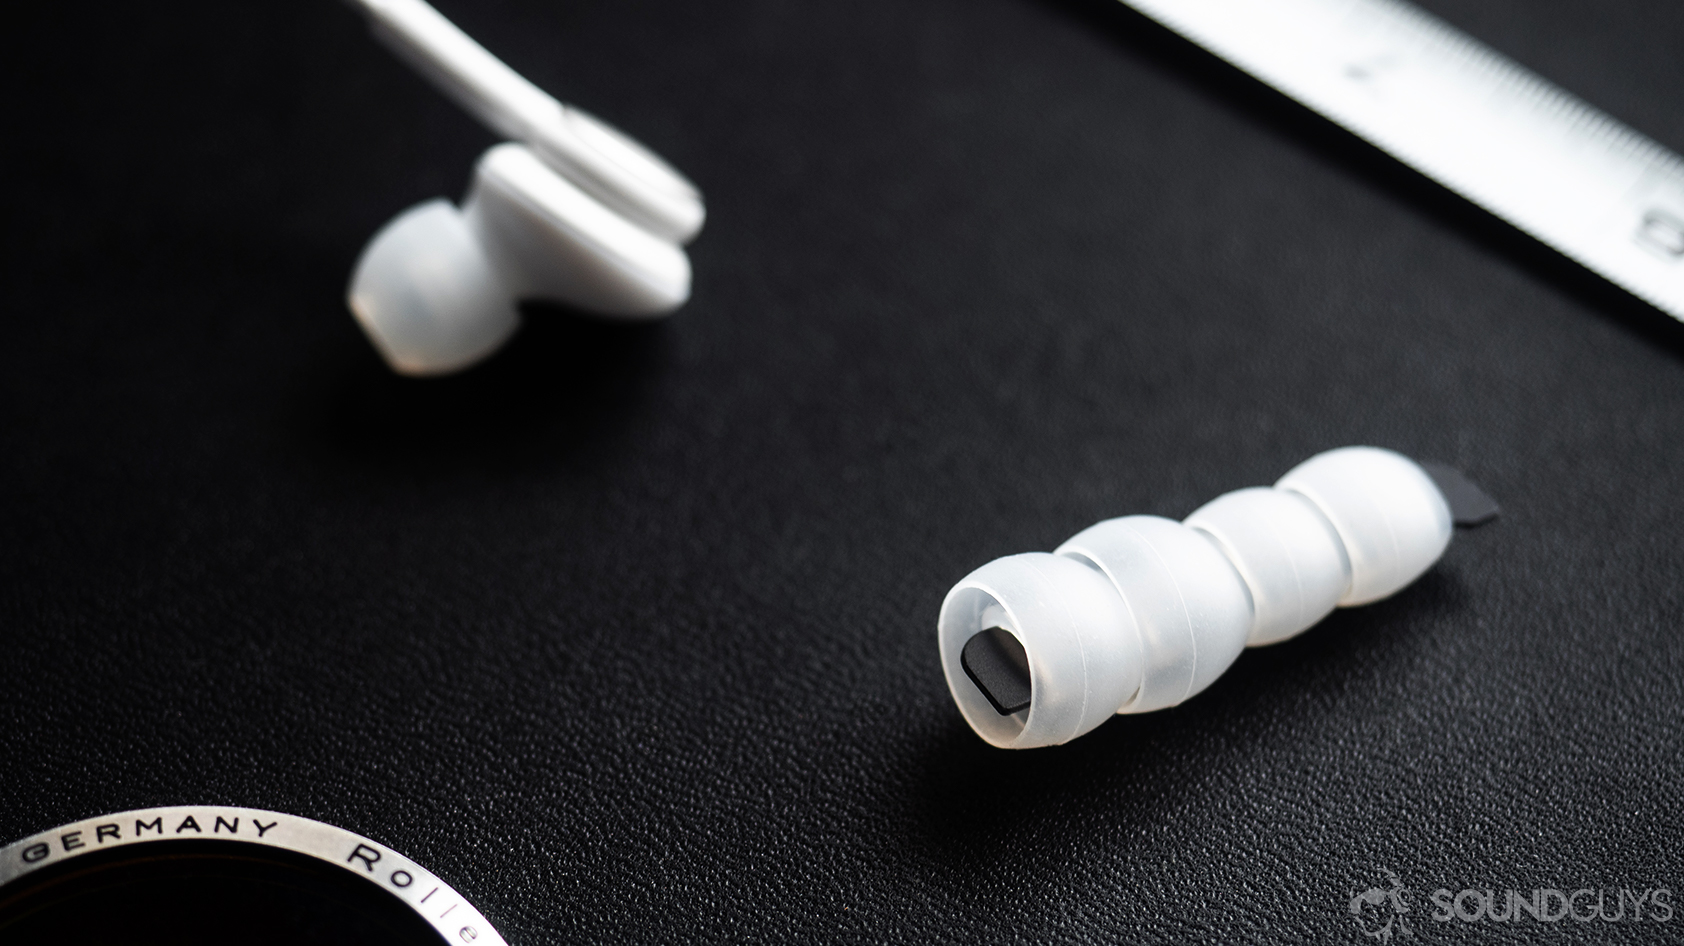 The AKG Samsung Galaxy S10e earbuds spare era tips on a black surface.